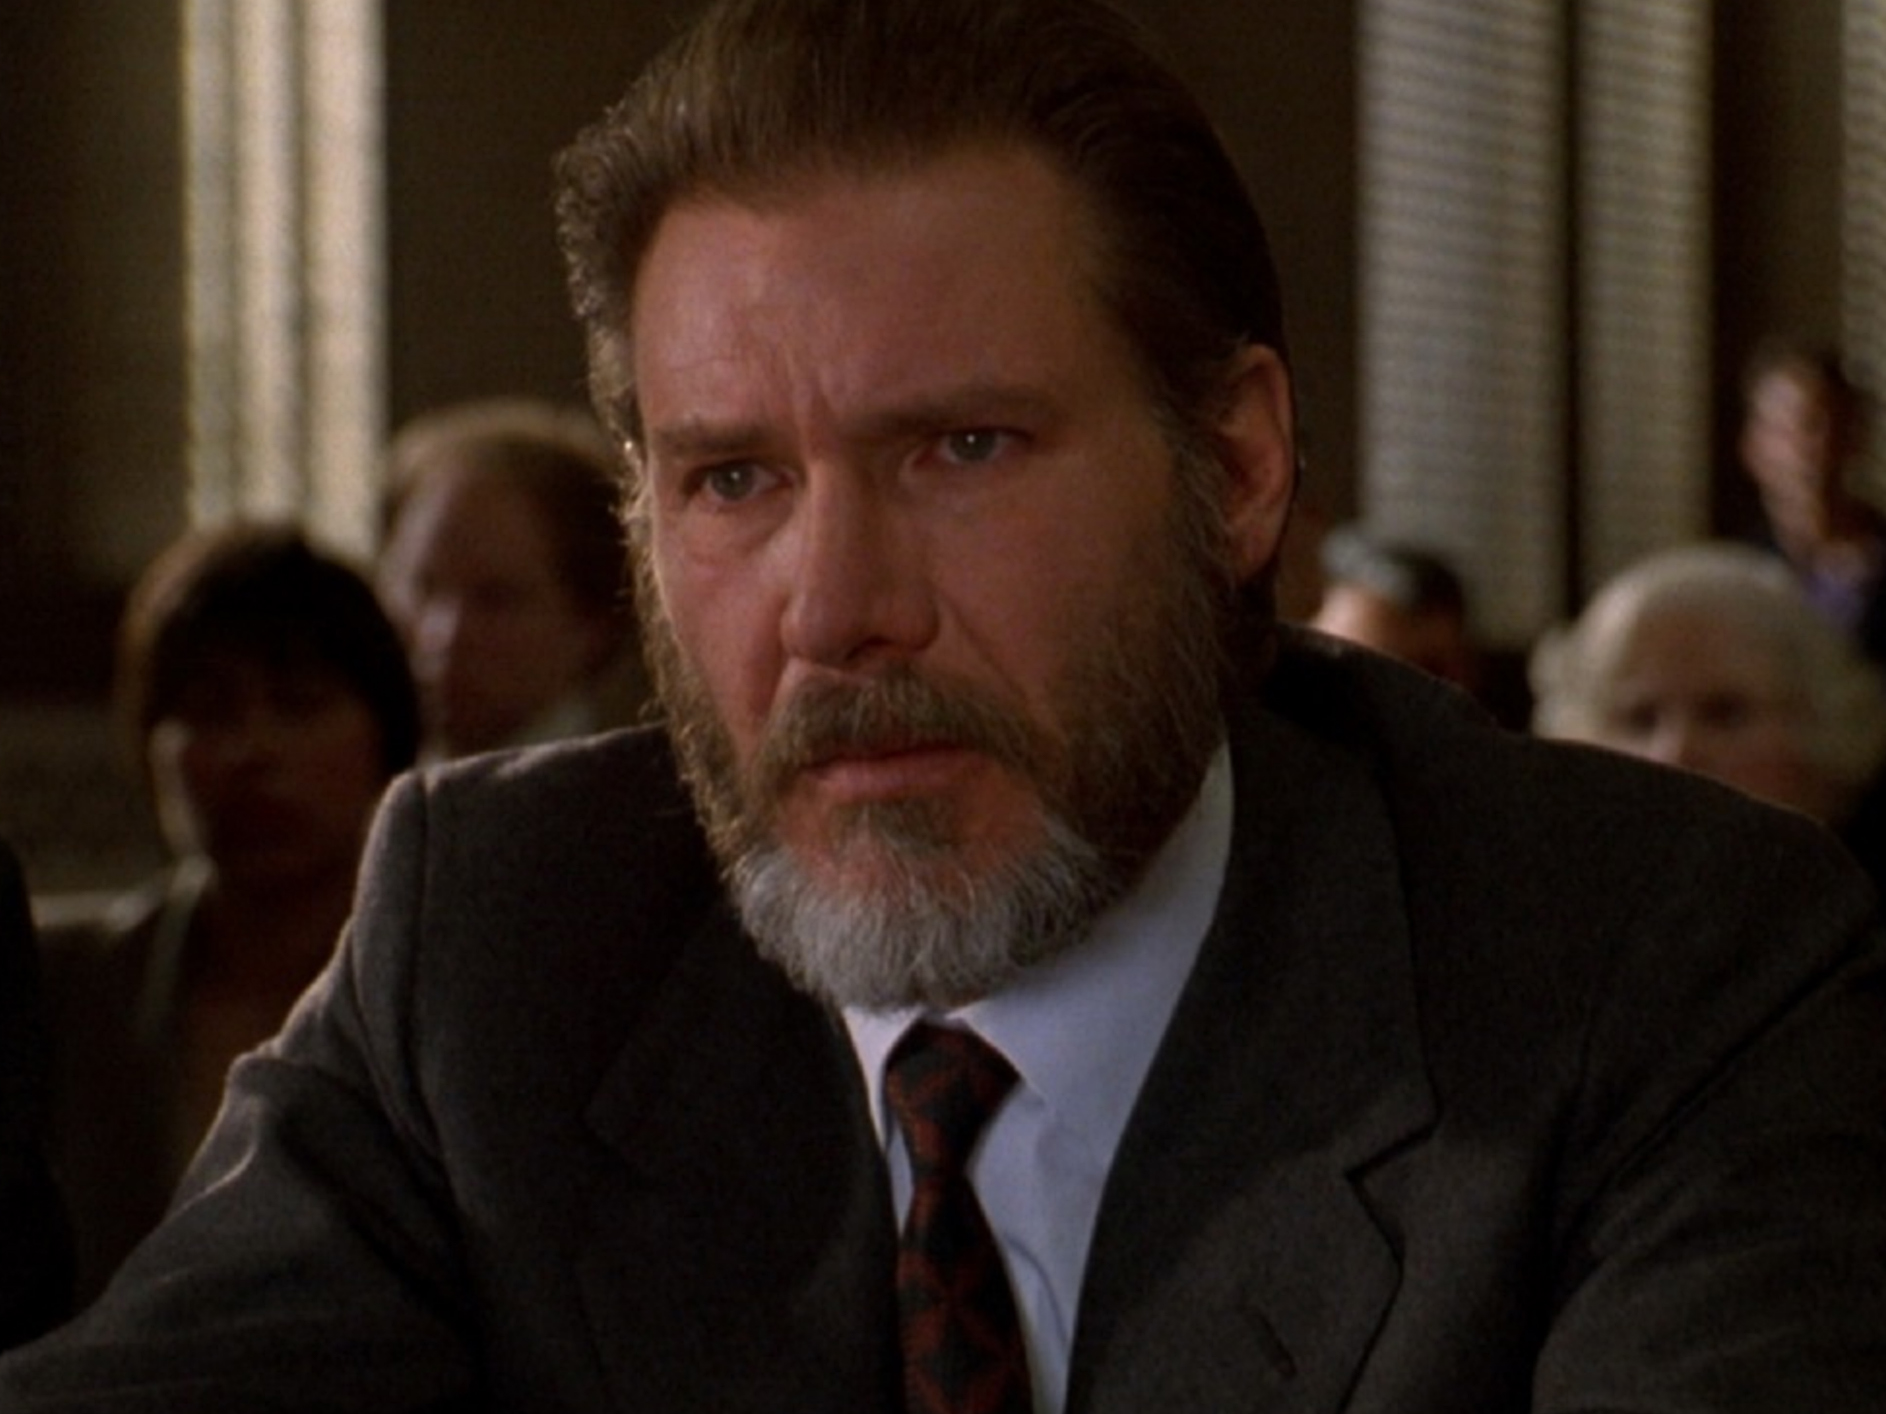 Harrison Ford in “The Fugitive” (1993)